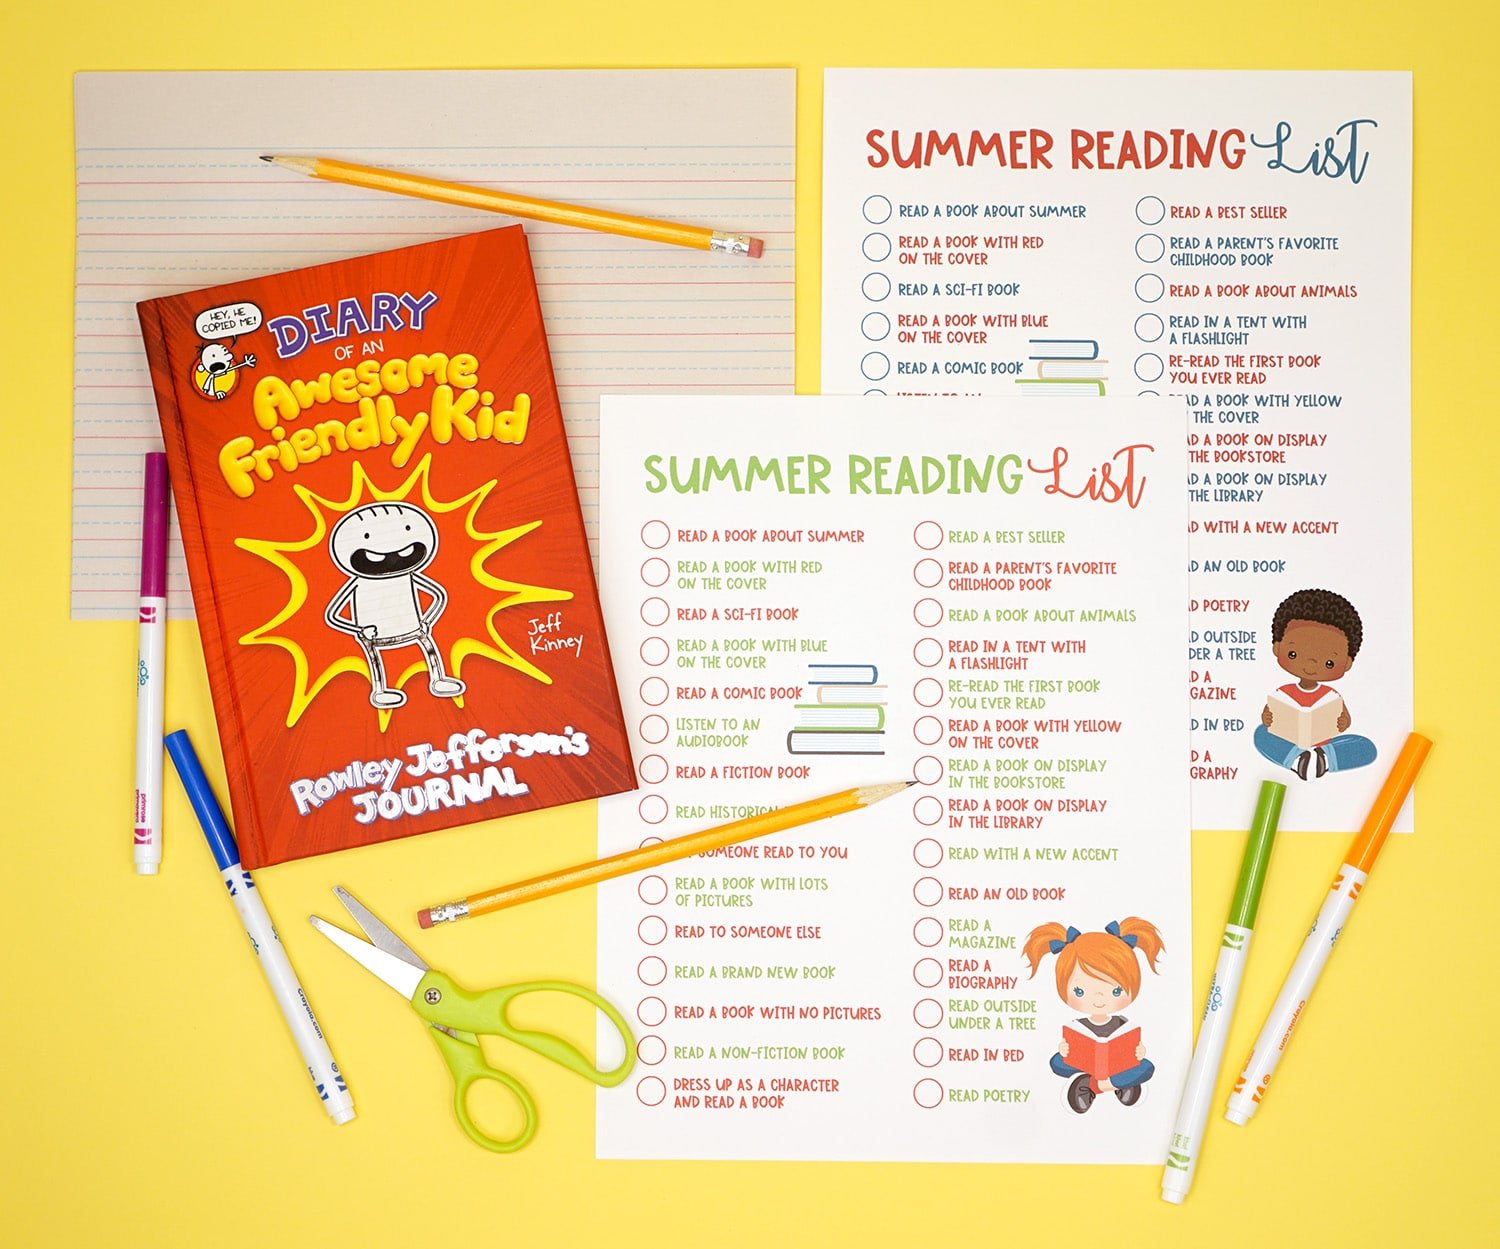 Diary of an Awesome Friendly Kid book and printable summer reading list on a yellow background with pens, pencils, and scissors 